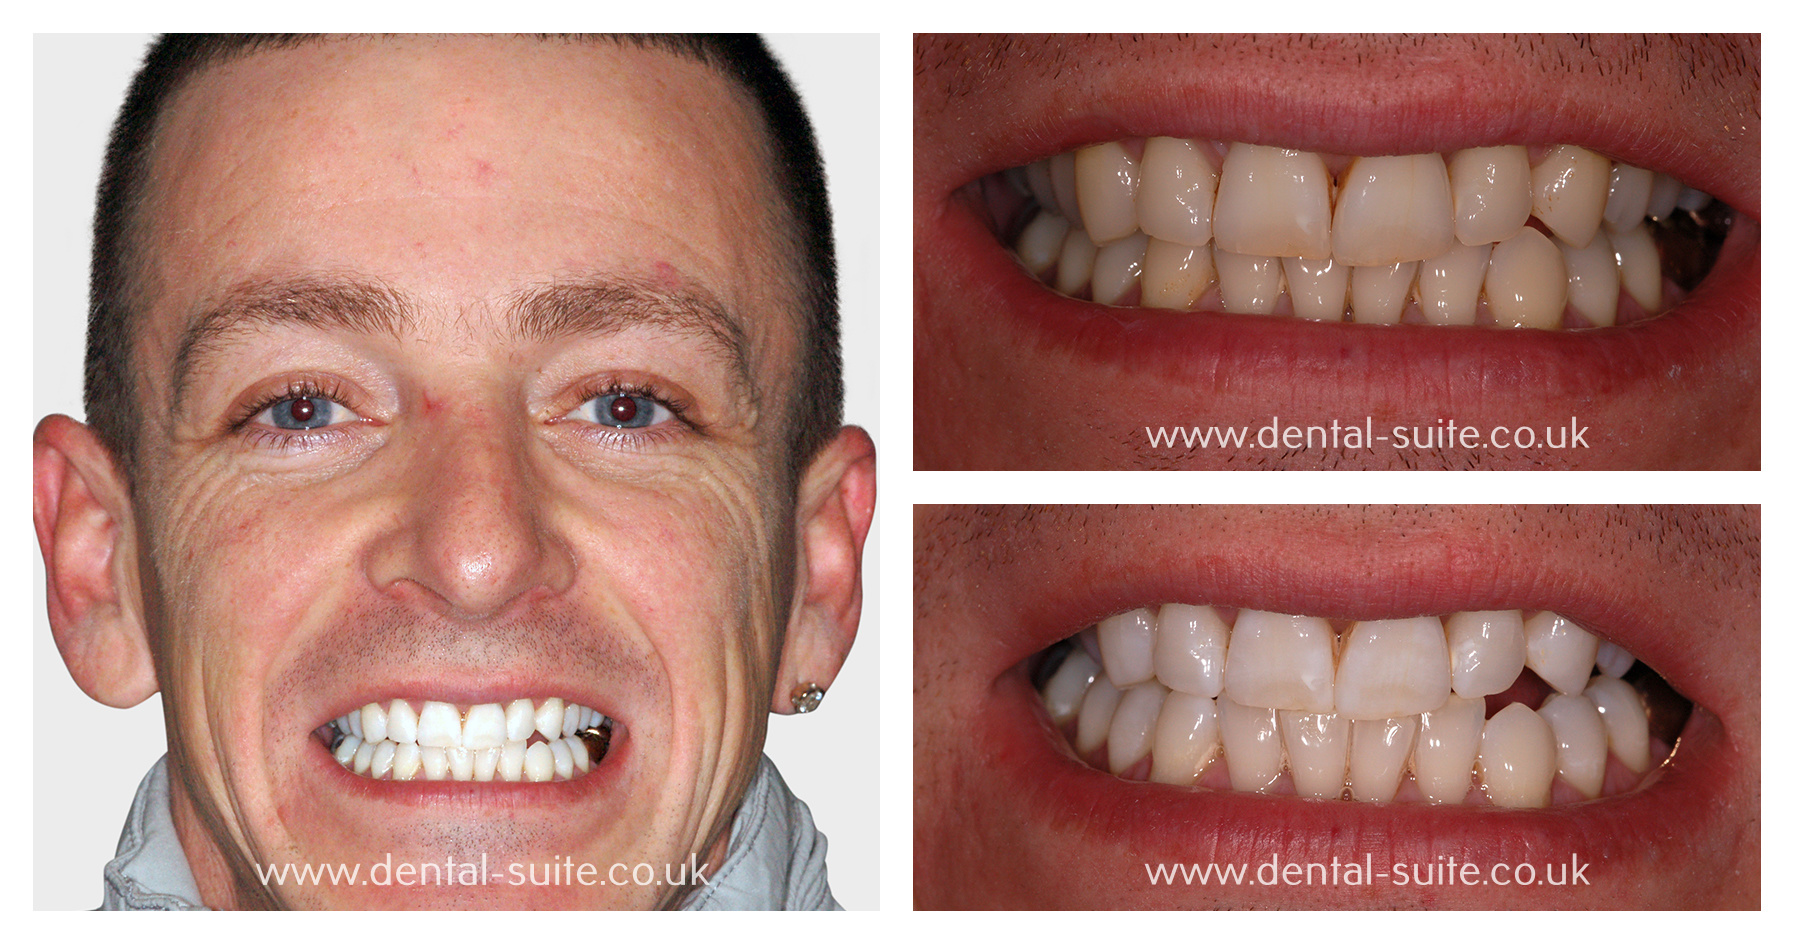 Want to Enhance Your Smile? The Best Carmel Dental Clinic Offers Teeth Whitening